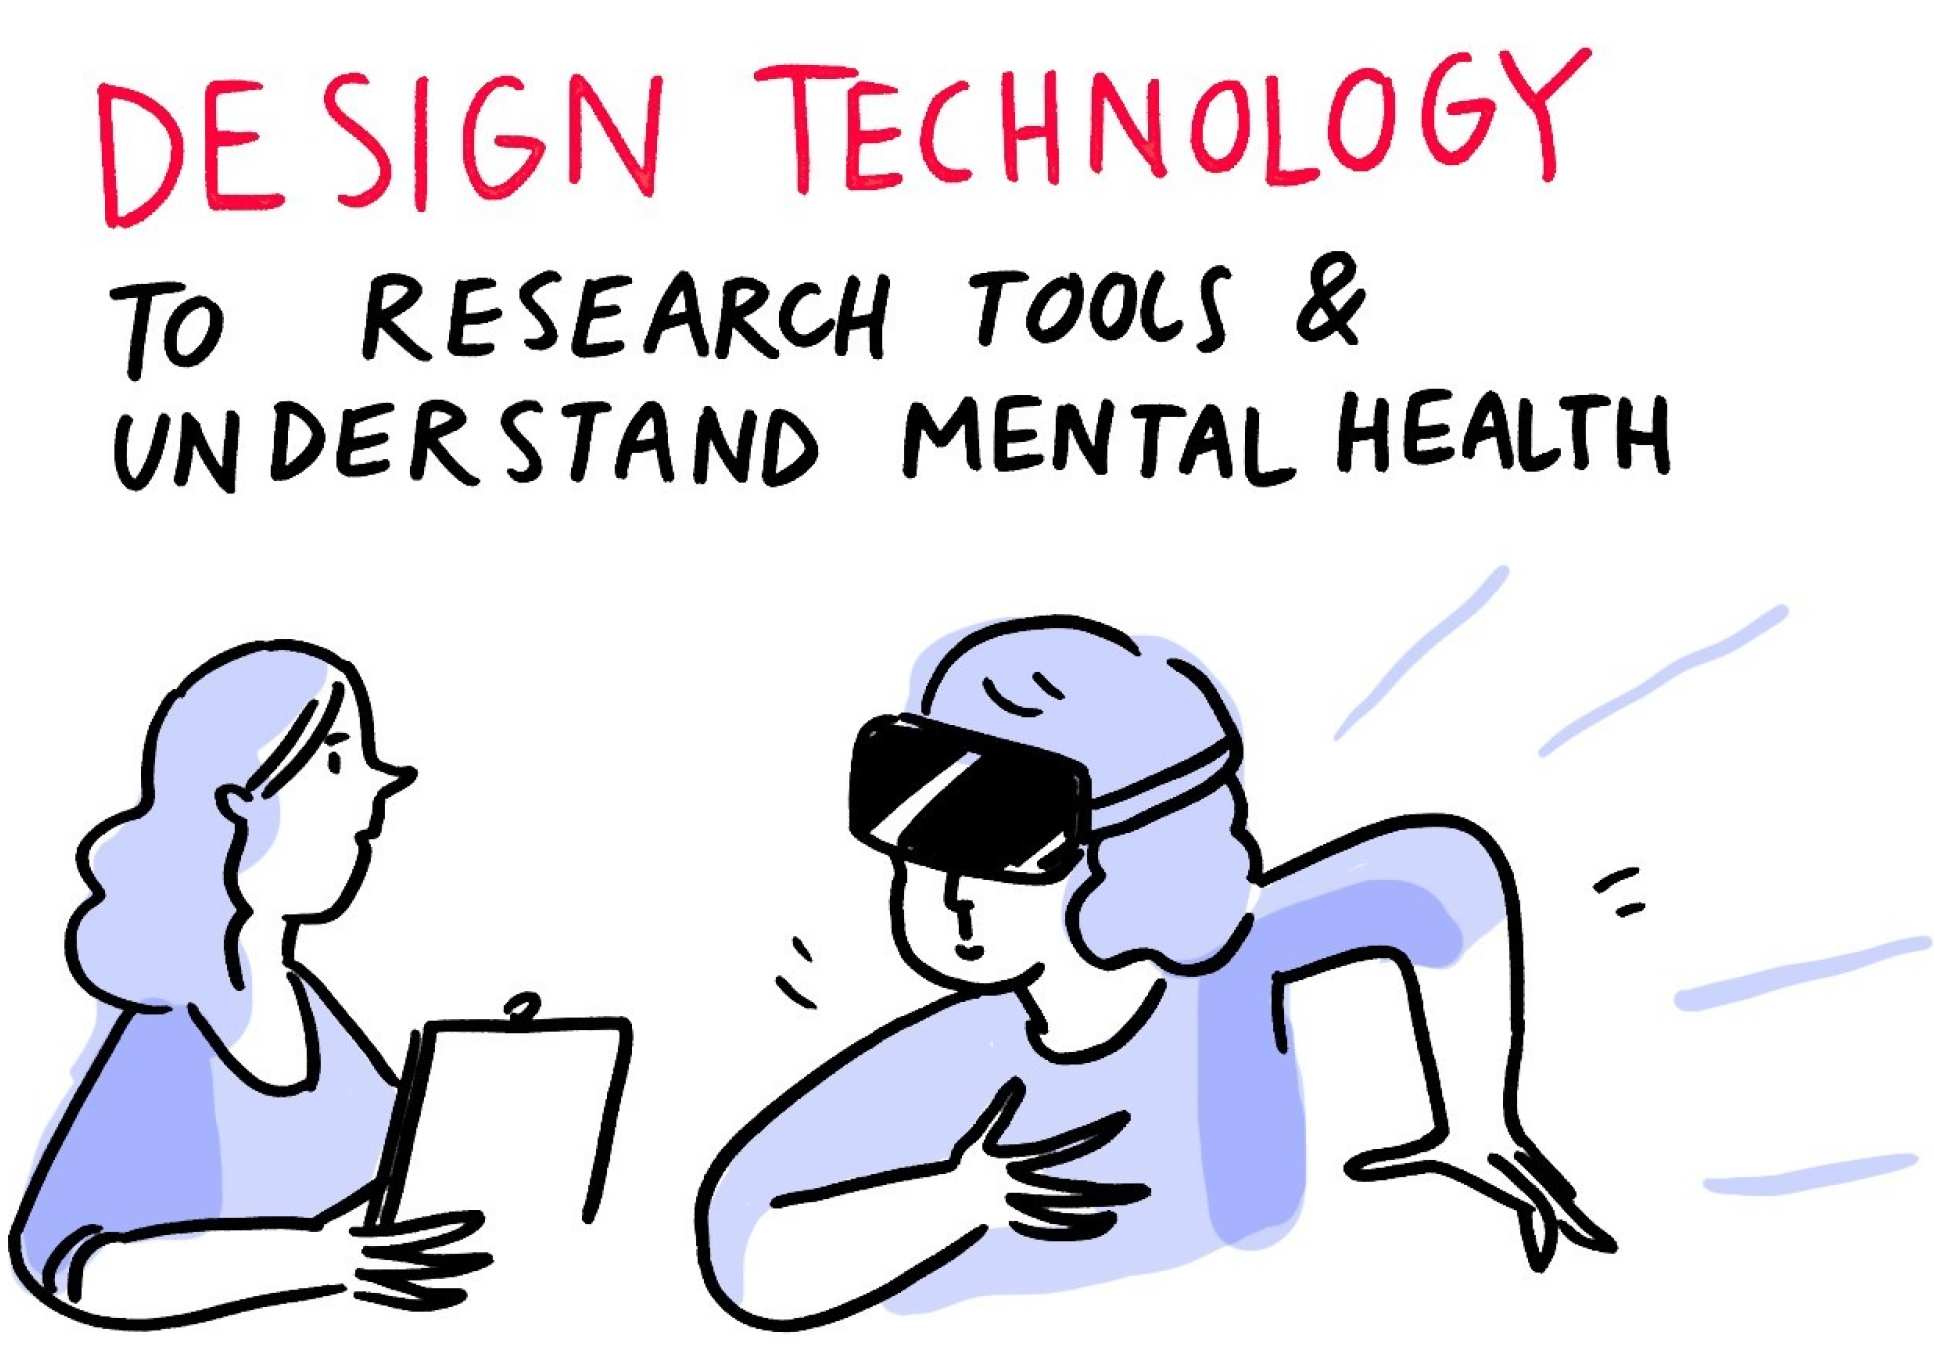 Dr Nerja Van Zalk's talk on cognitive needs as illustrated by Josie Ford (detail). See full image.